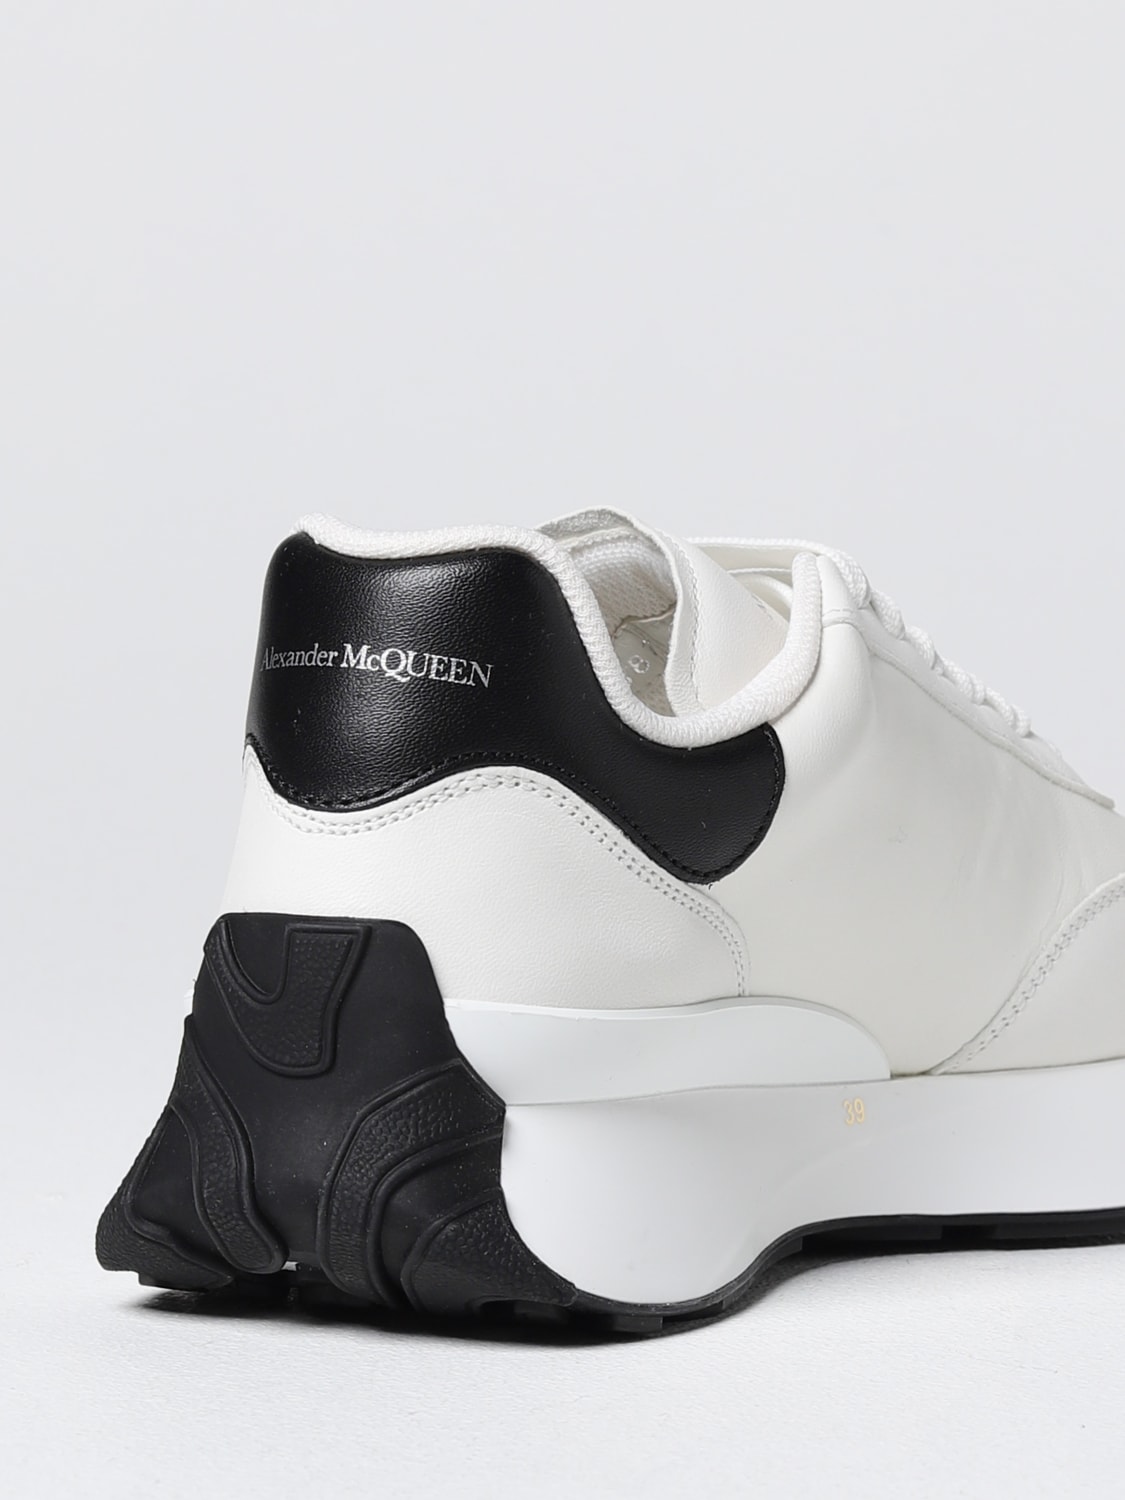 ALEXANDER in smooth leather - White | Alexander sneakers 687995WIC93 online at GIGLIO.COM